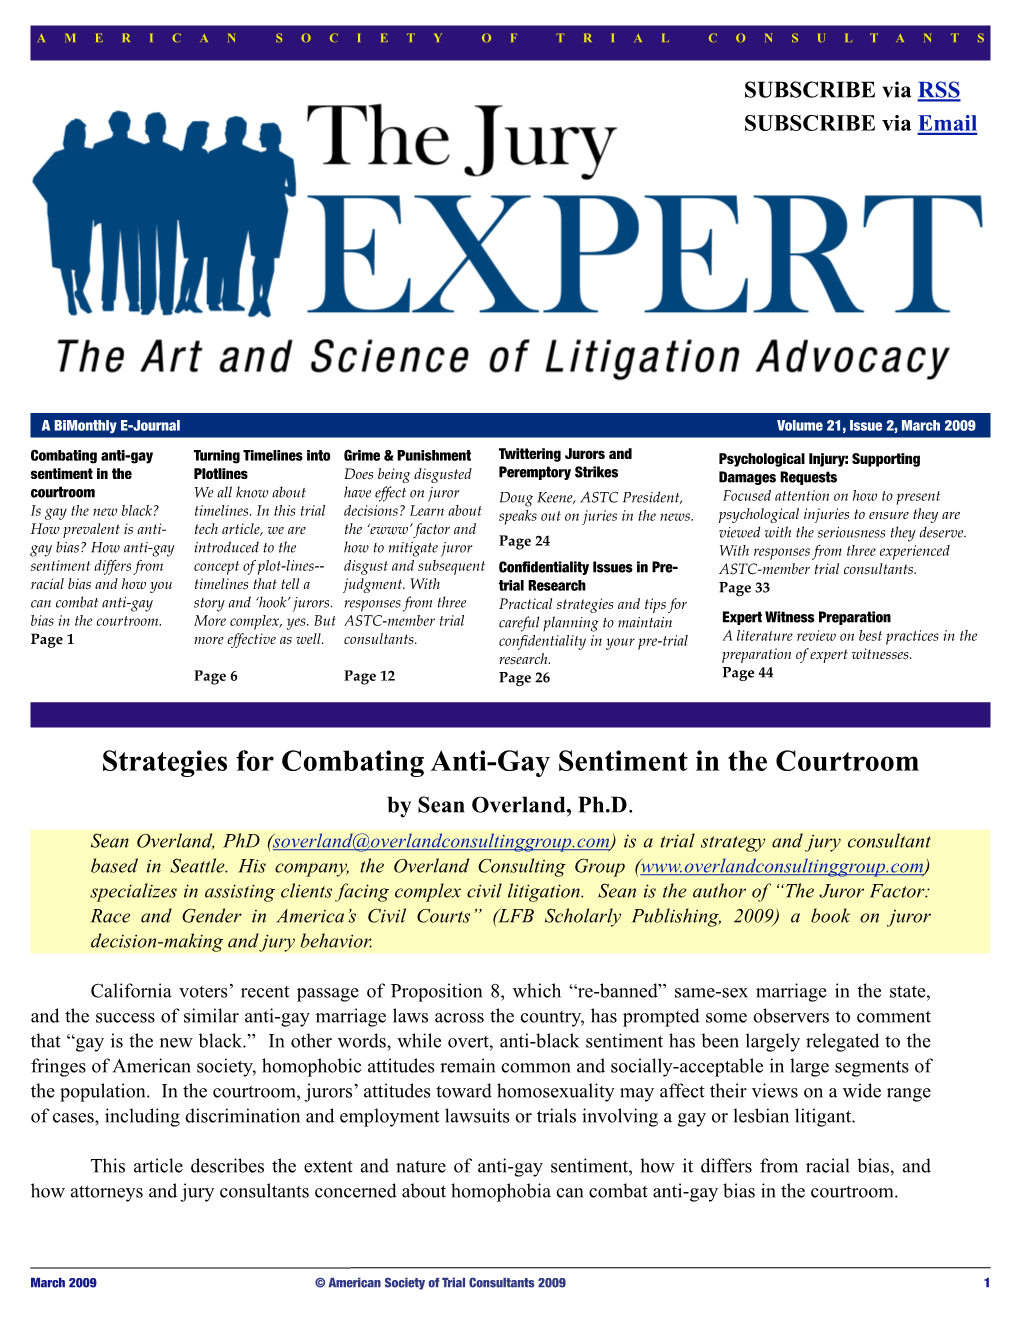 Strategies for Combating Anti-Gay Sentiment in the Courtroom by Sean Overland, Ph.D